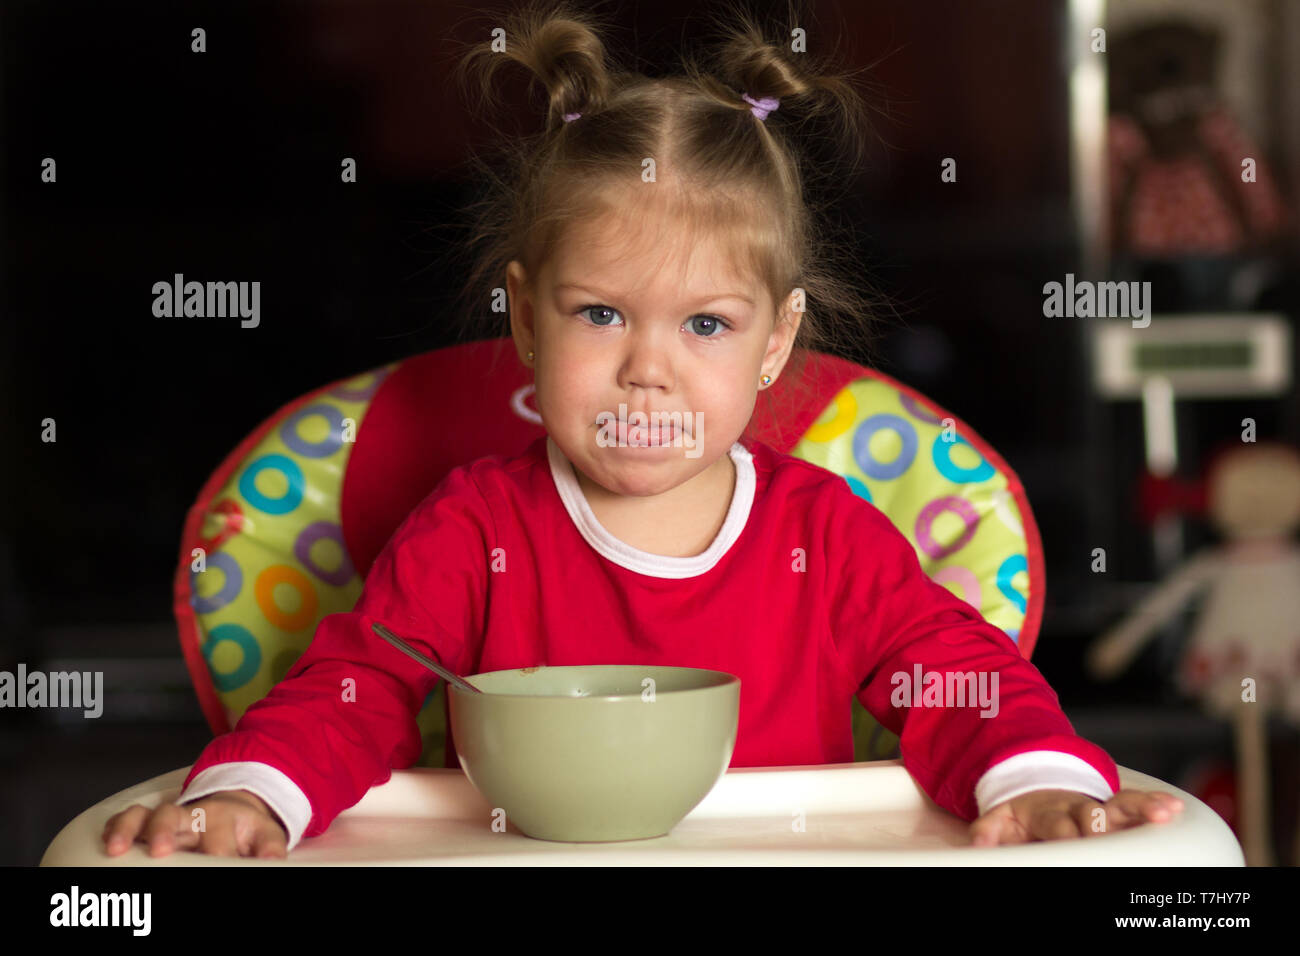 portrait of little girl looking at camera and licking her lips after eating porridge Stock Photo